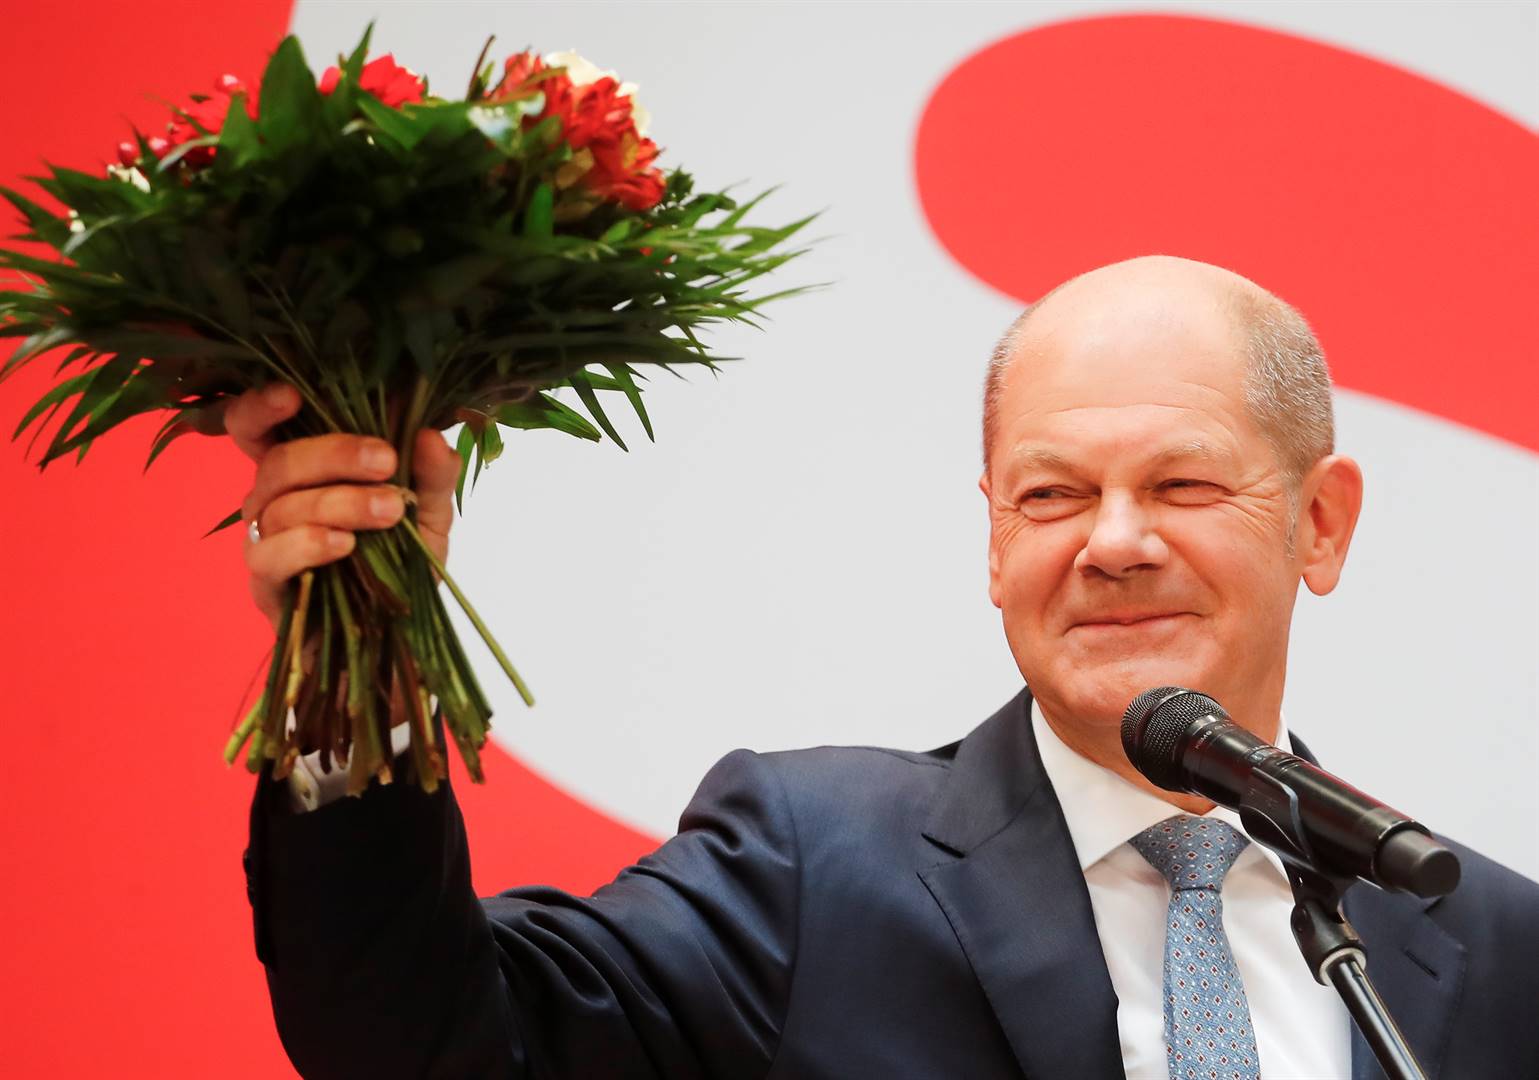 olaf-scholz-to-take-charge-of-germany-as-merkel-era-ends-news24